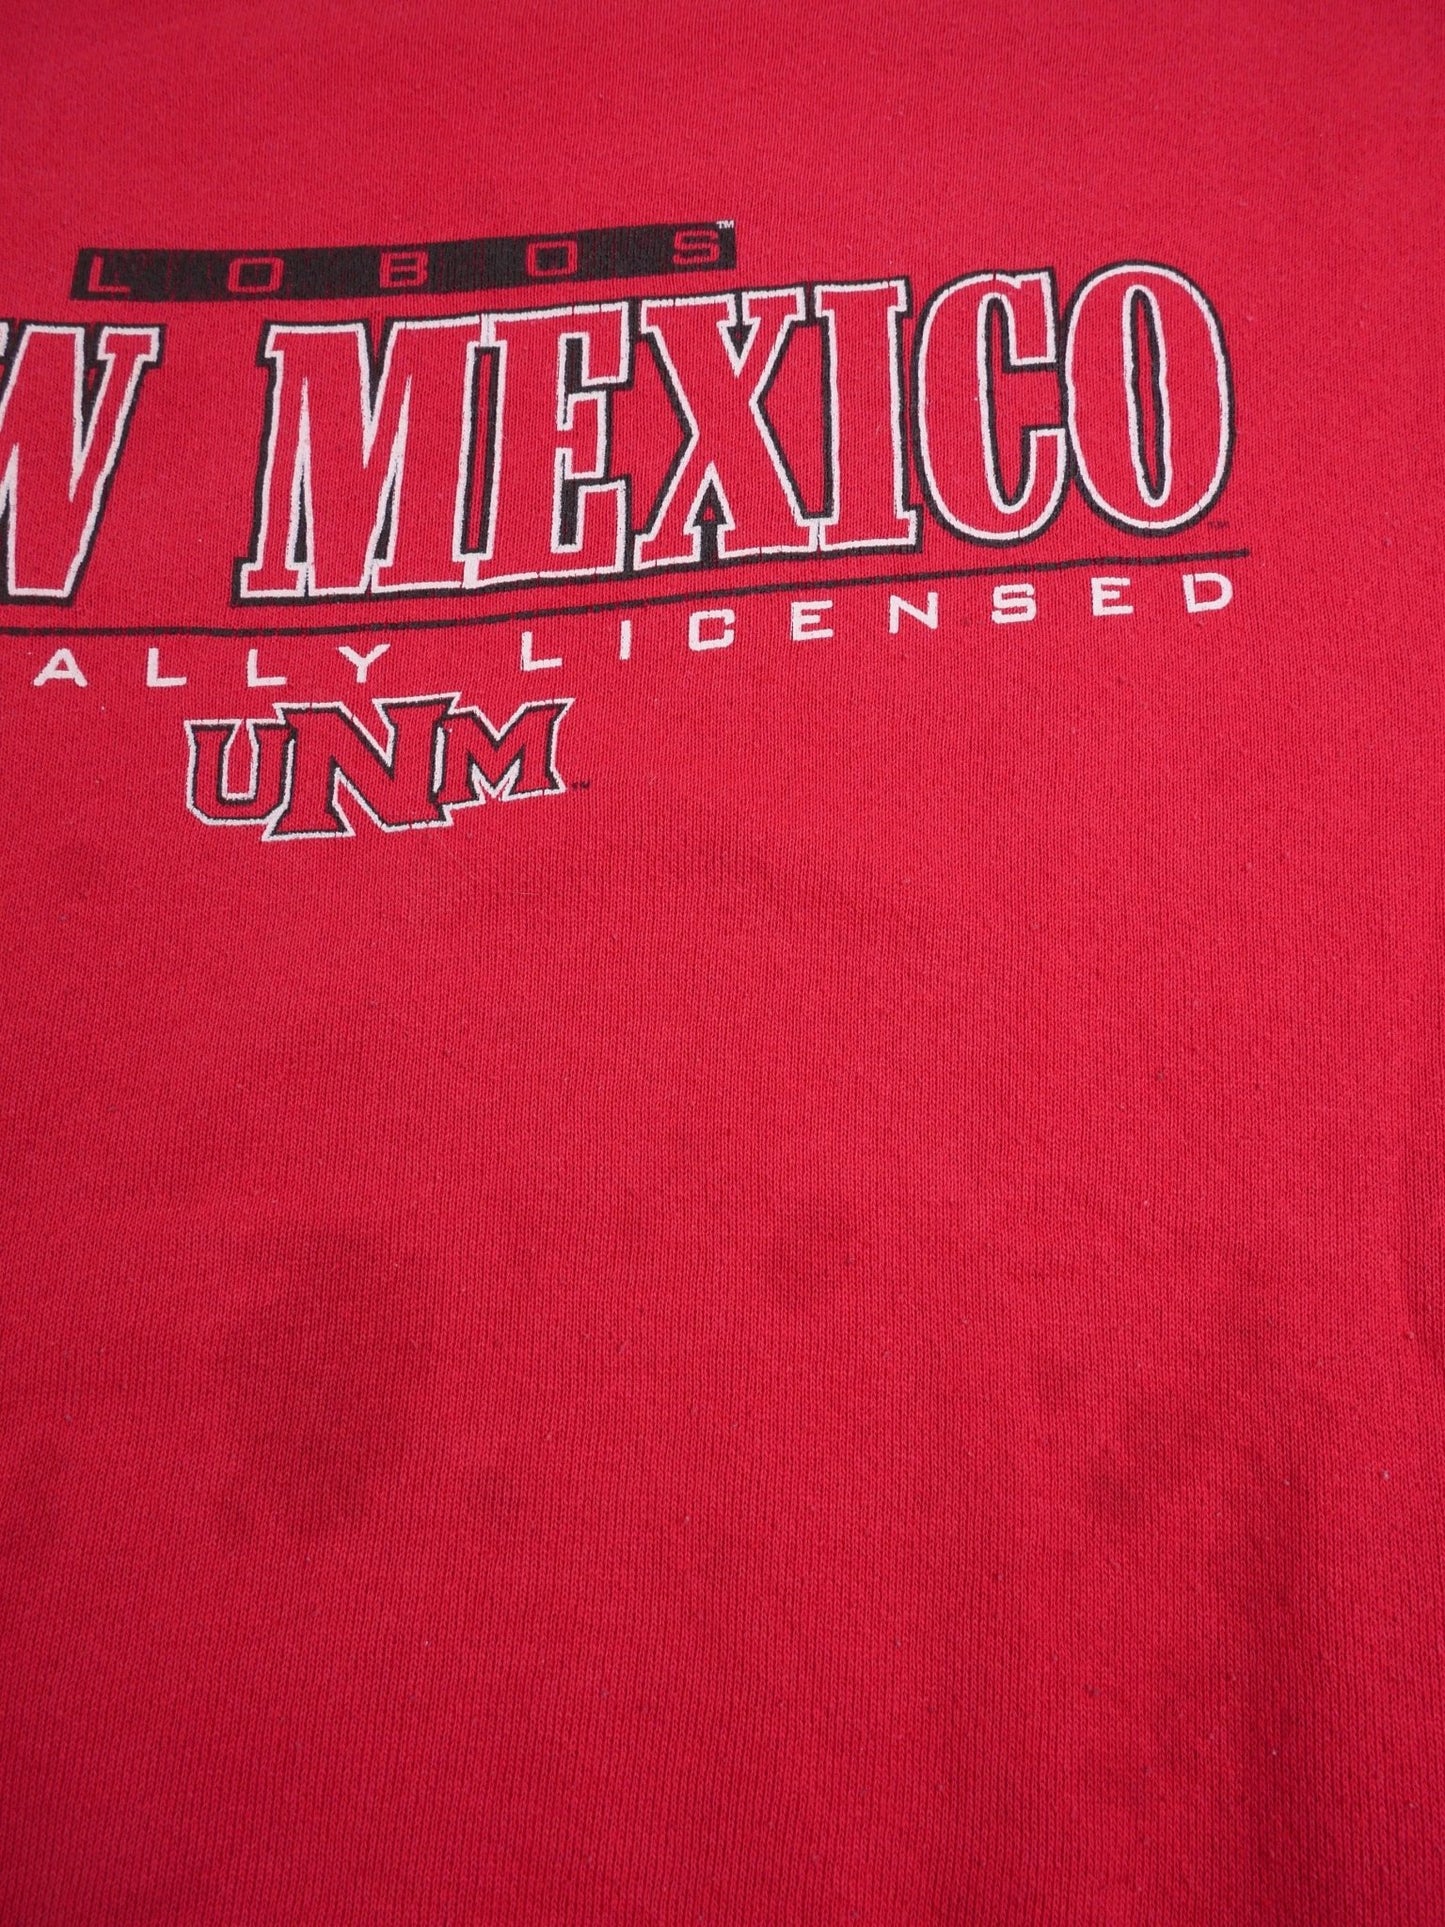 New Mexico printed Graphic red Sweater - Peeces